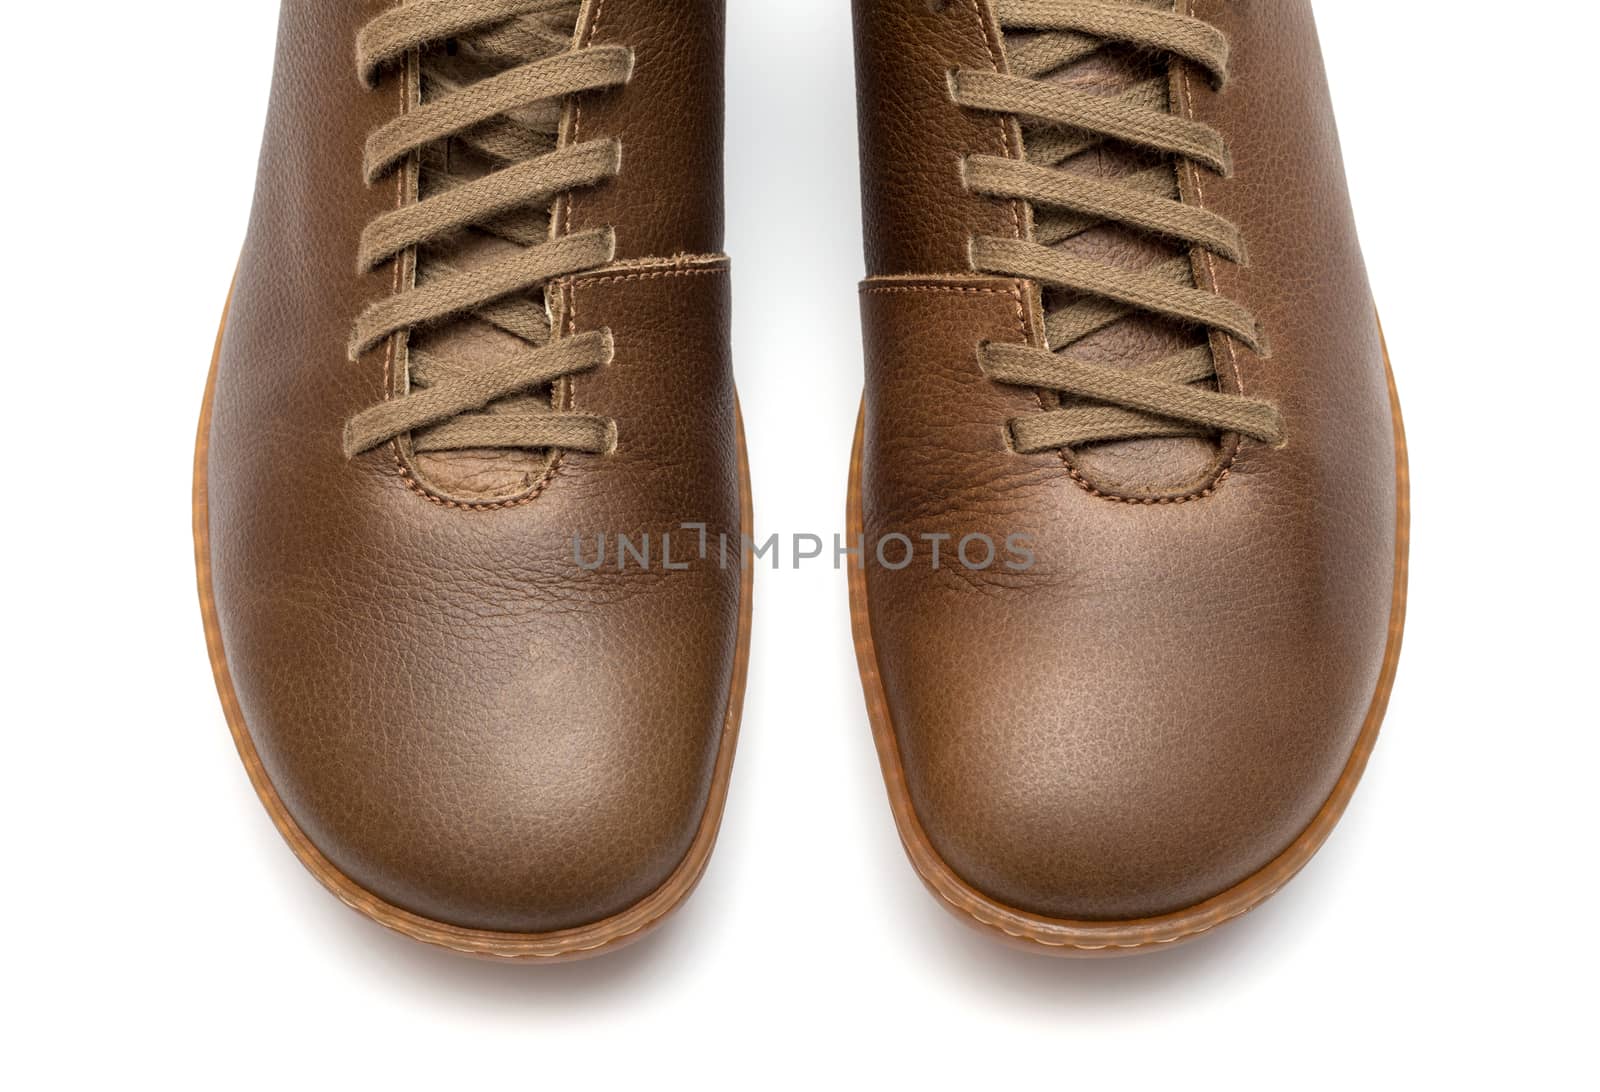 Brown Leather Men Shoes isolated on white background